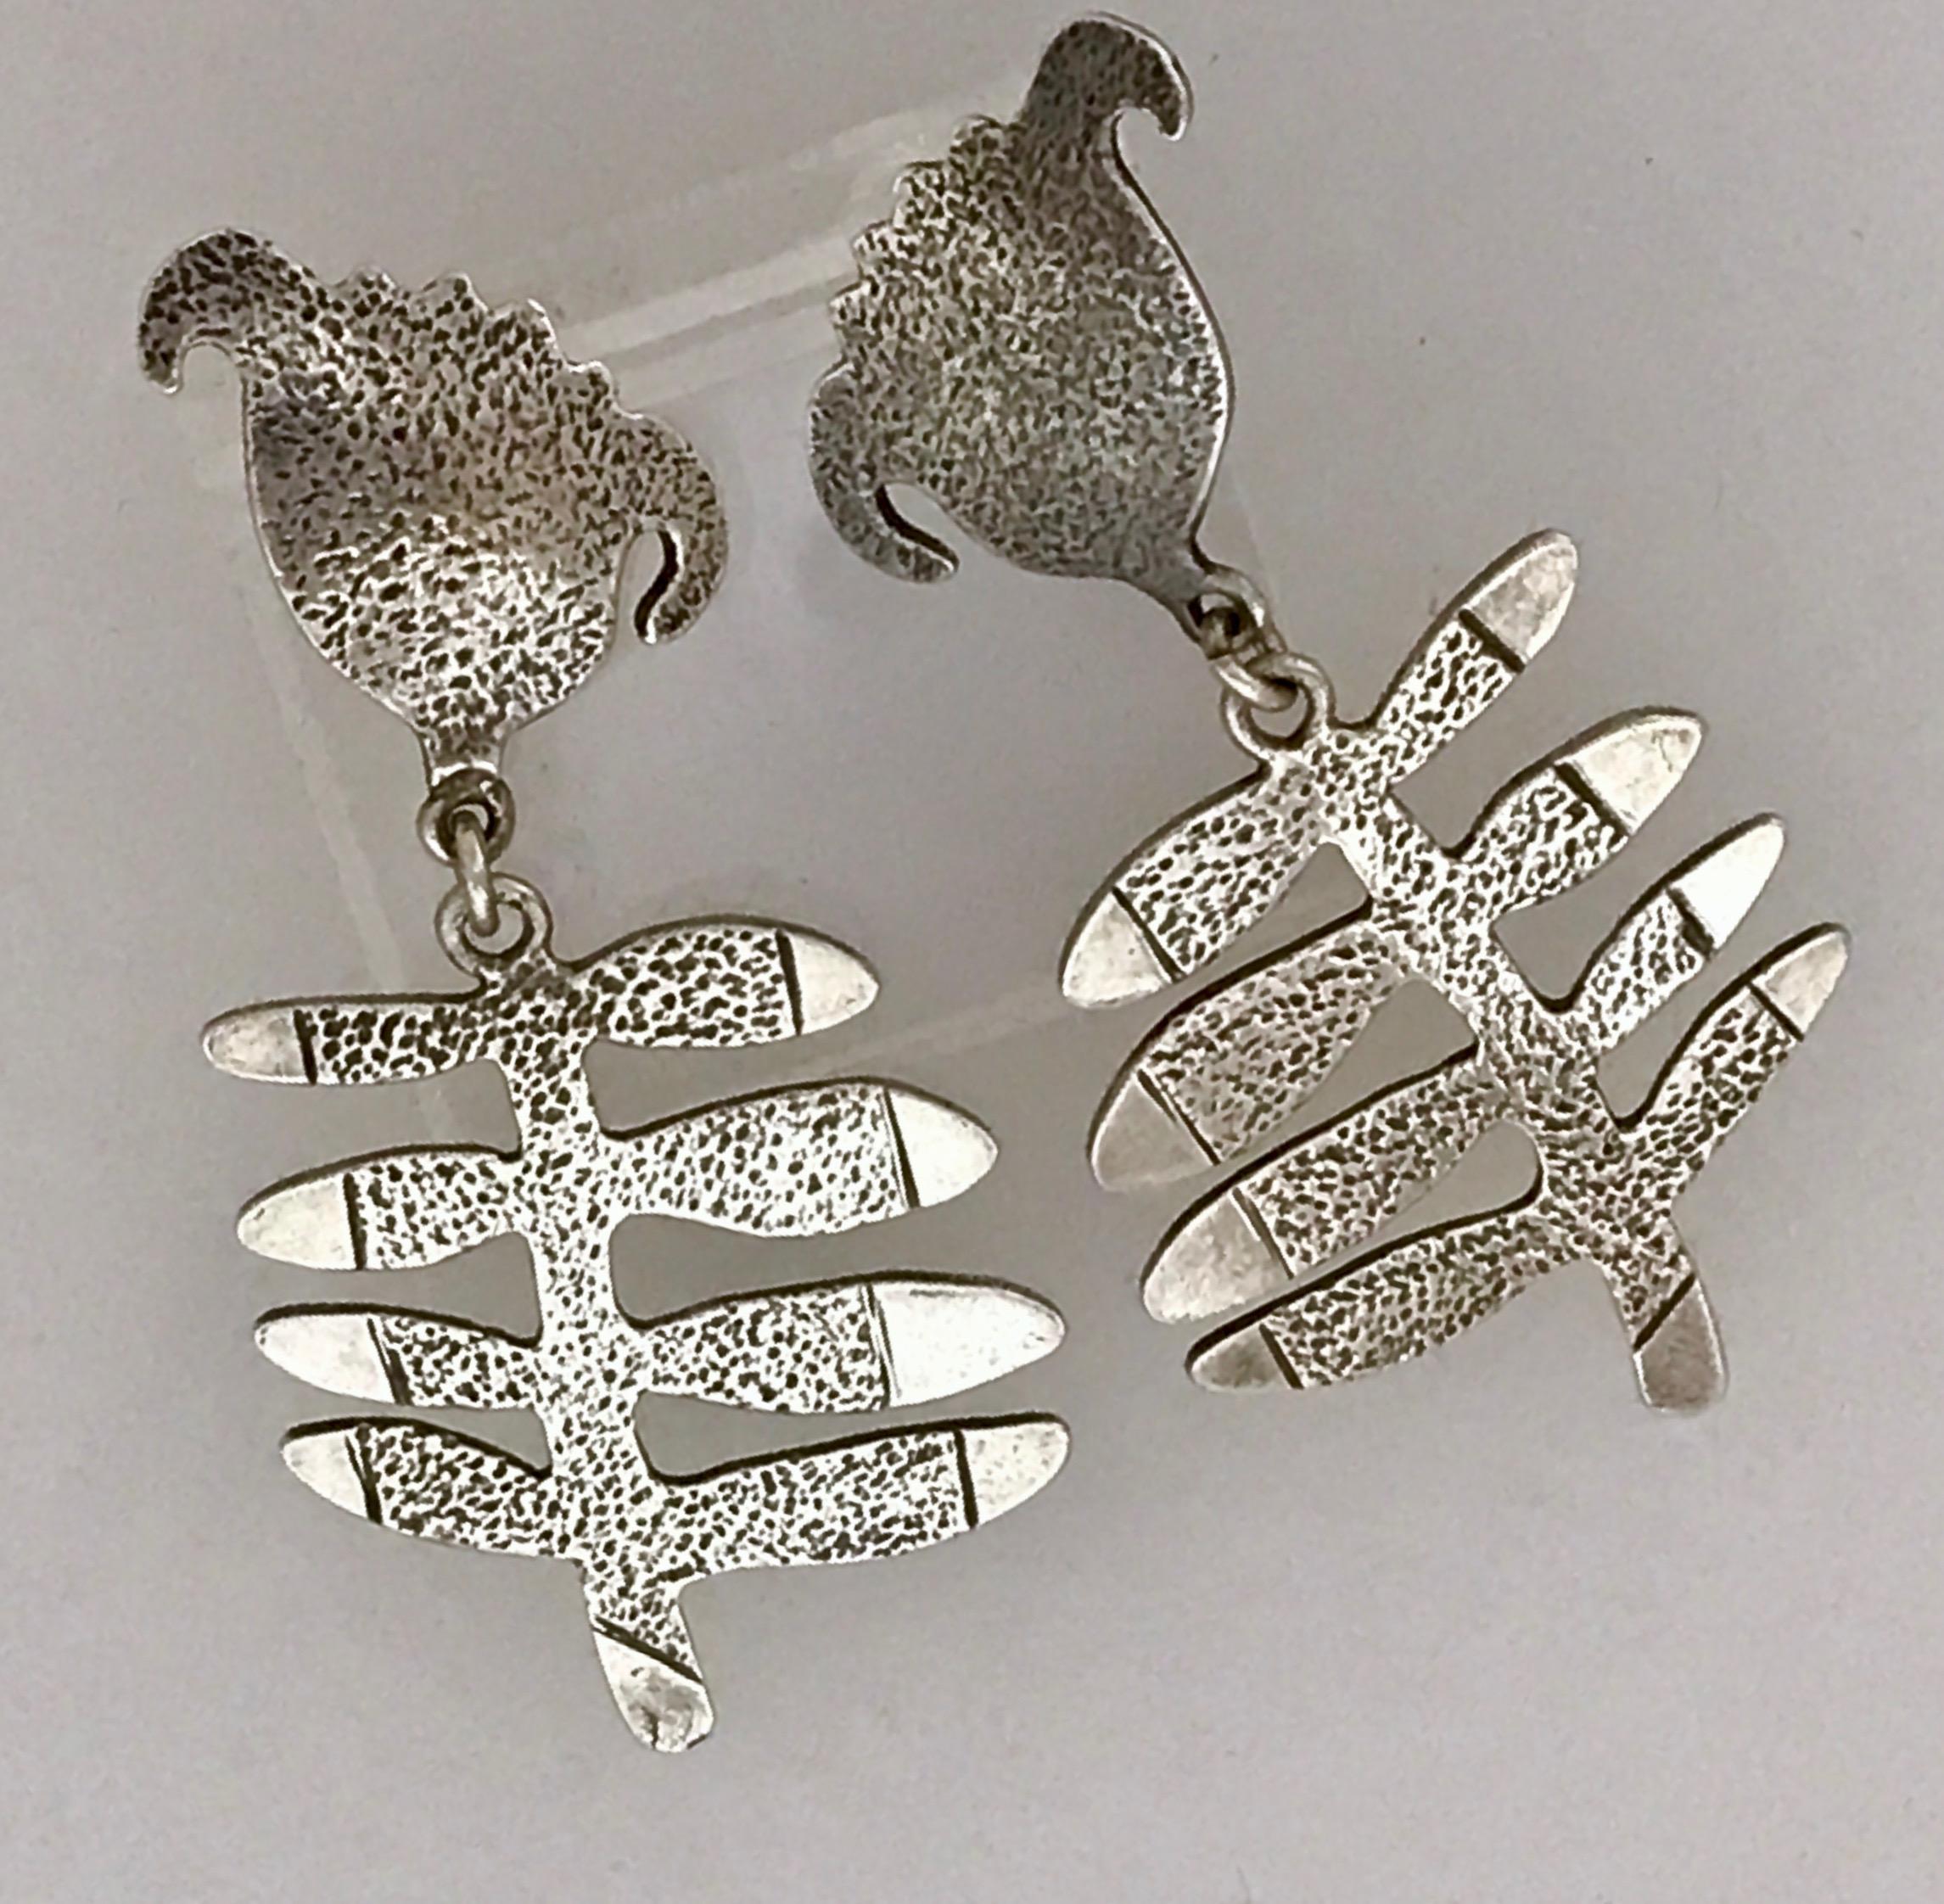 Flower earrings cast sterling silver dangle earrings Melanie Yazzie flowers
The weight is the combined total of both earrings. 

Melanie A. Yazzie (Navajo-Diné) is a highly regarded multimedia artist known for her printmaking, paintings, sculpture,